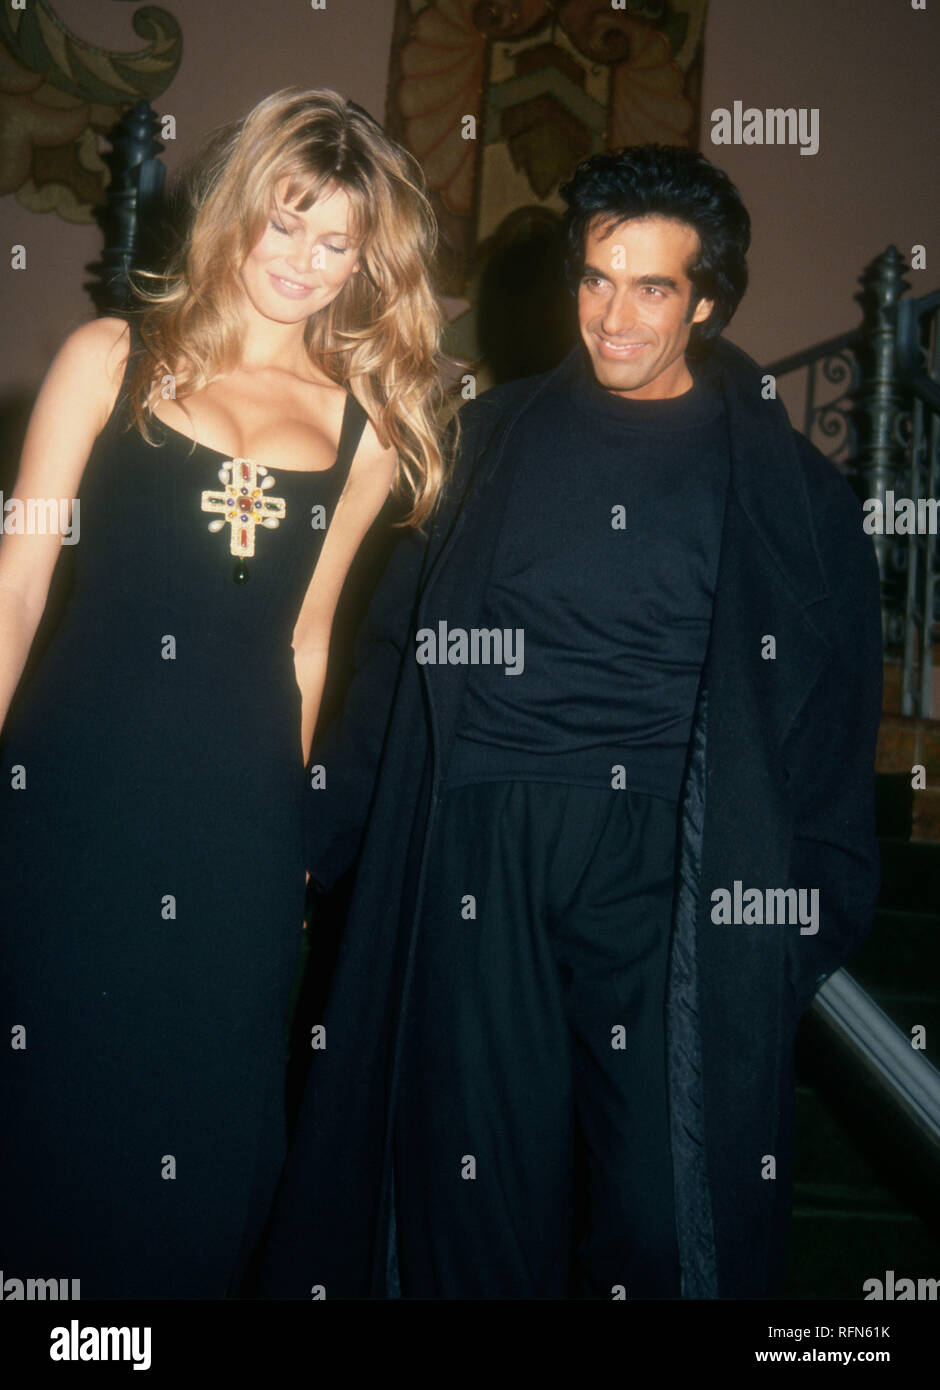 LOS ANGELES, CA - NOVEMBER 10: Model Claudia Schiffer and Magician David Copperfield attend David Copperfield's Magic Show to Benefit the Starlight Children's Foundation on on November 10, 1993 at the Wiltern Theatre in Los Angeles, California. Photo by Barry King/Alamy Stock Photo Stock Photo